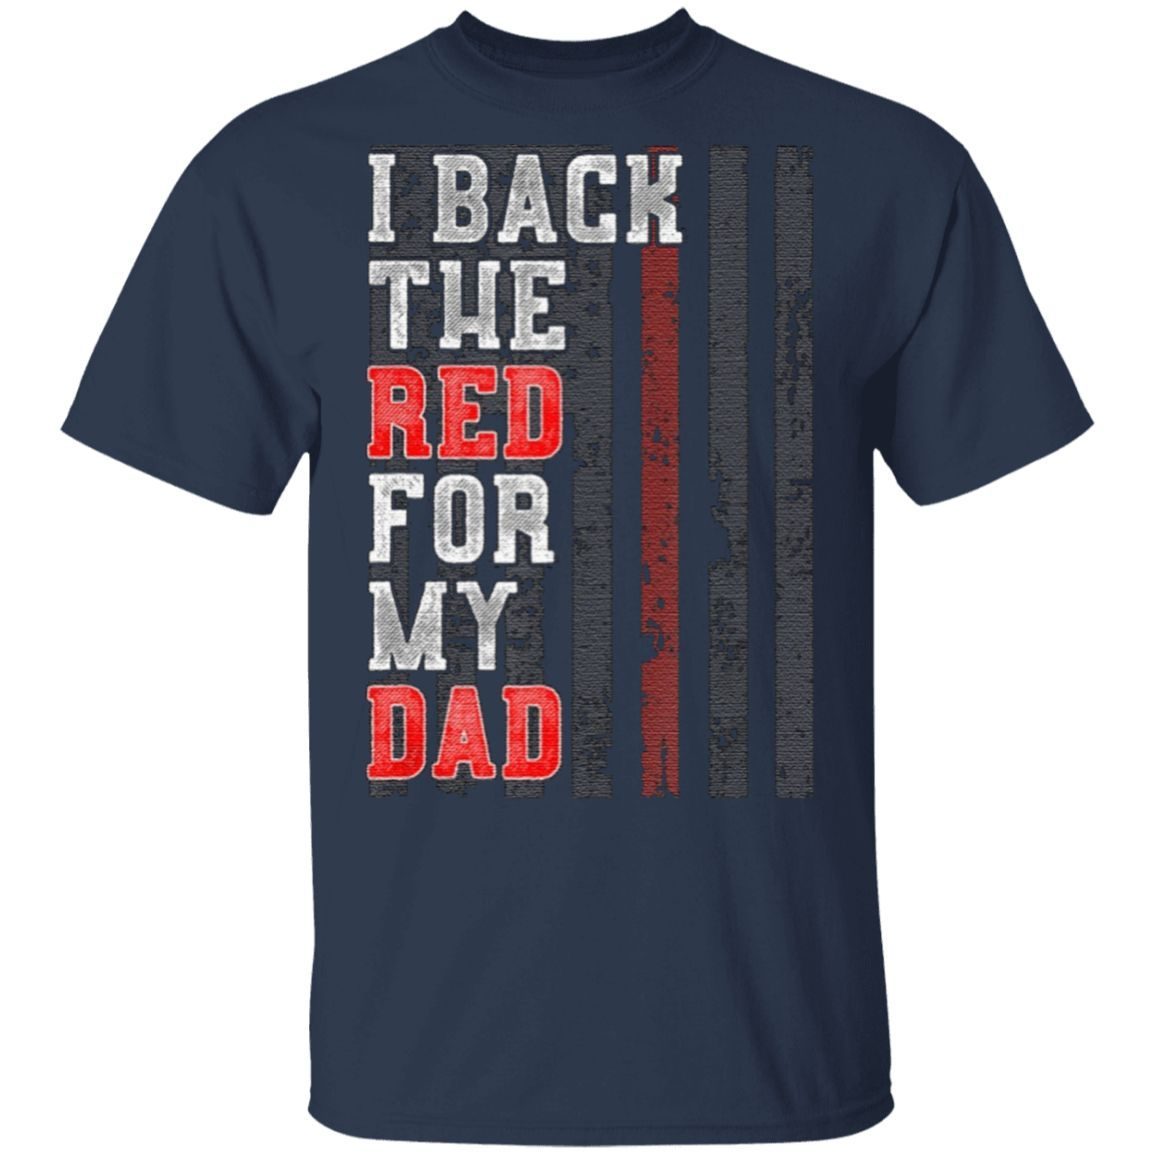 I back the red for my dad t shirt